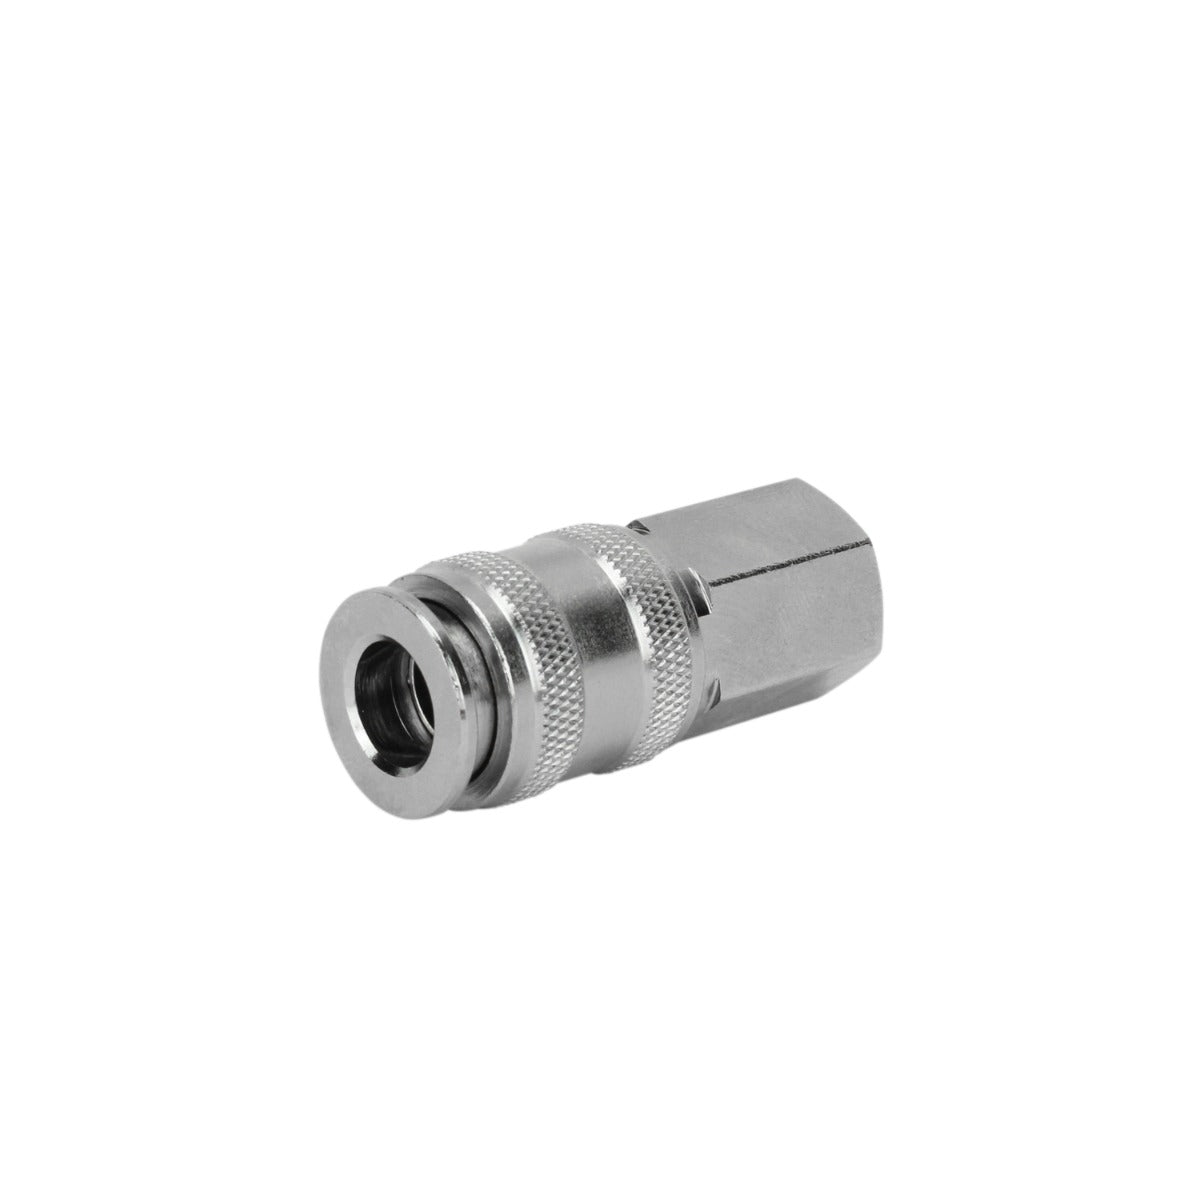 5 In ONE® Universal Quick-Connect Coupler, 1/4